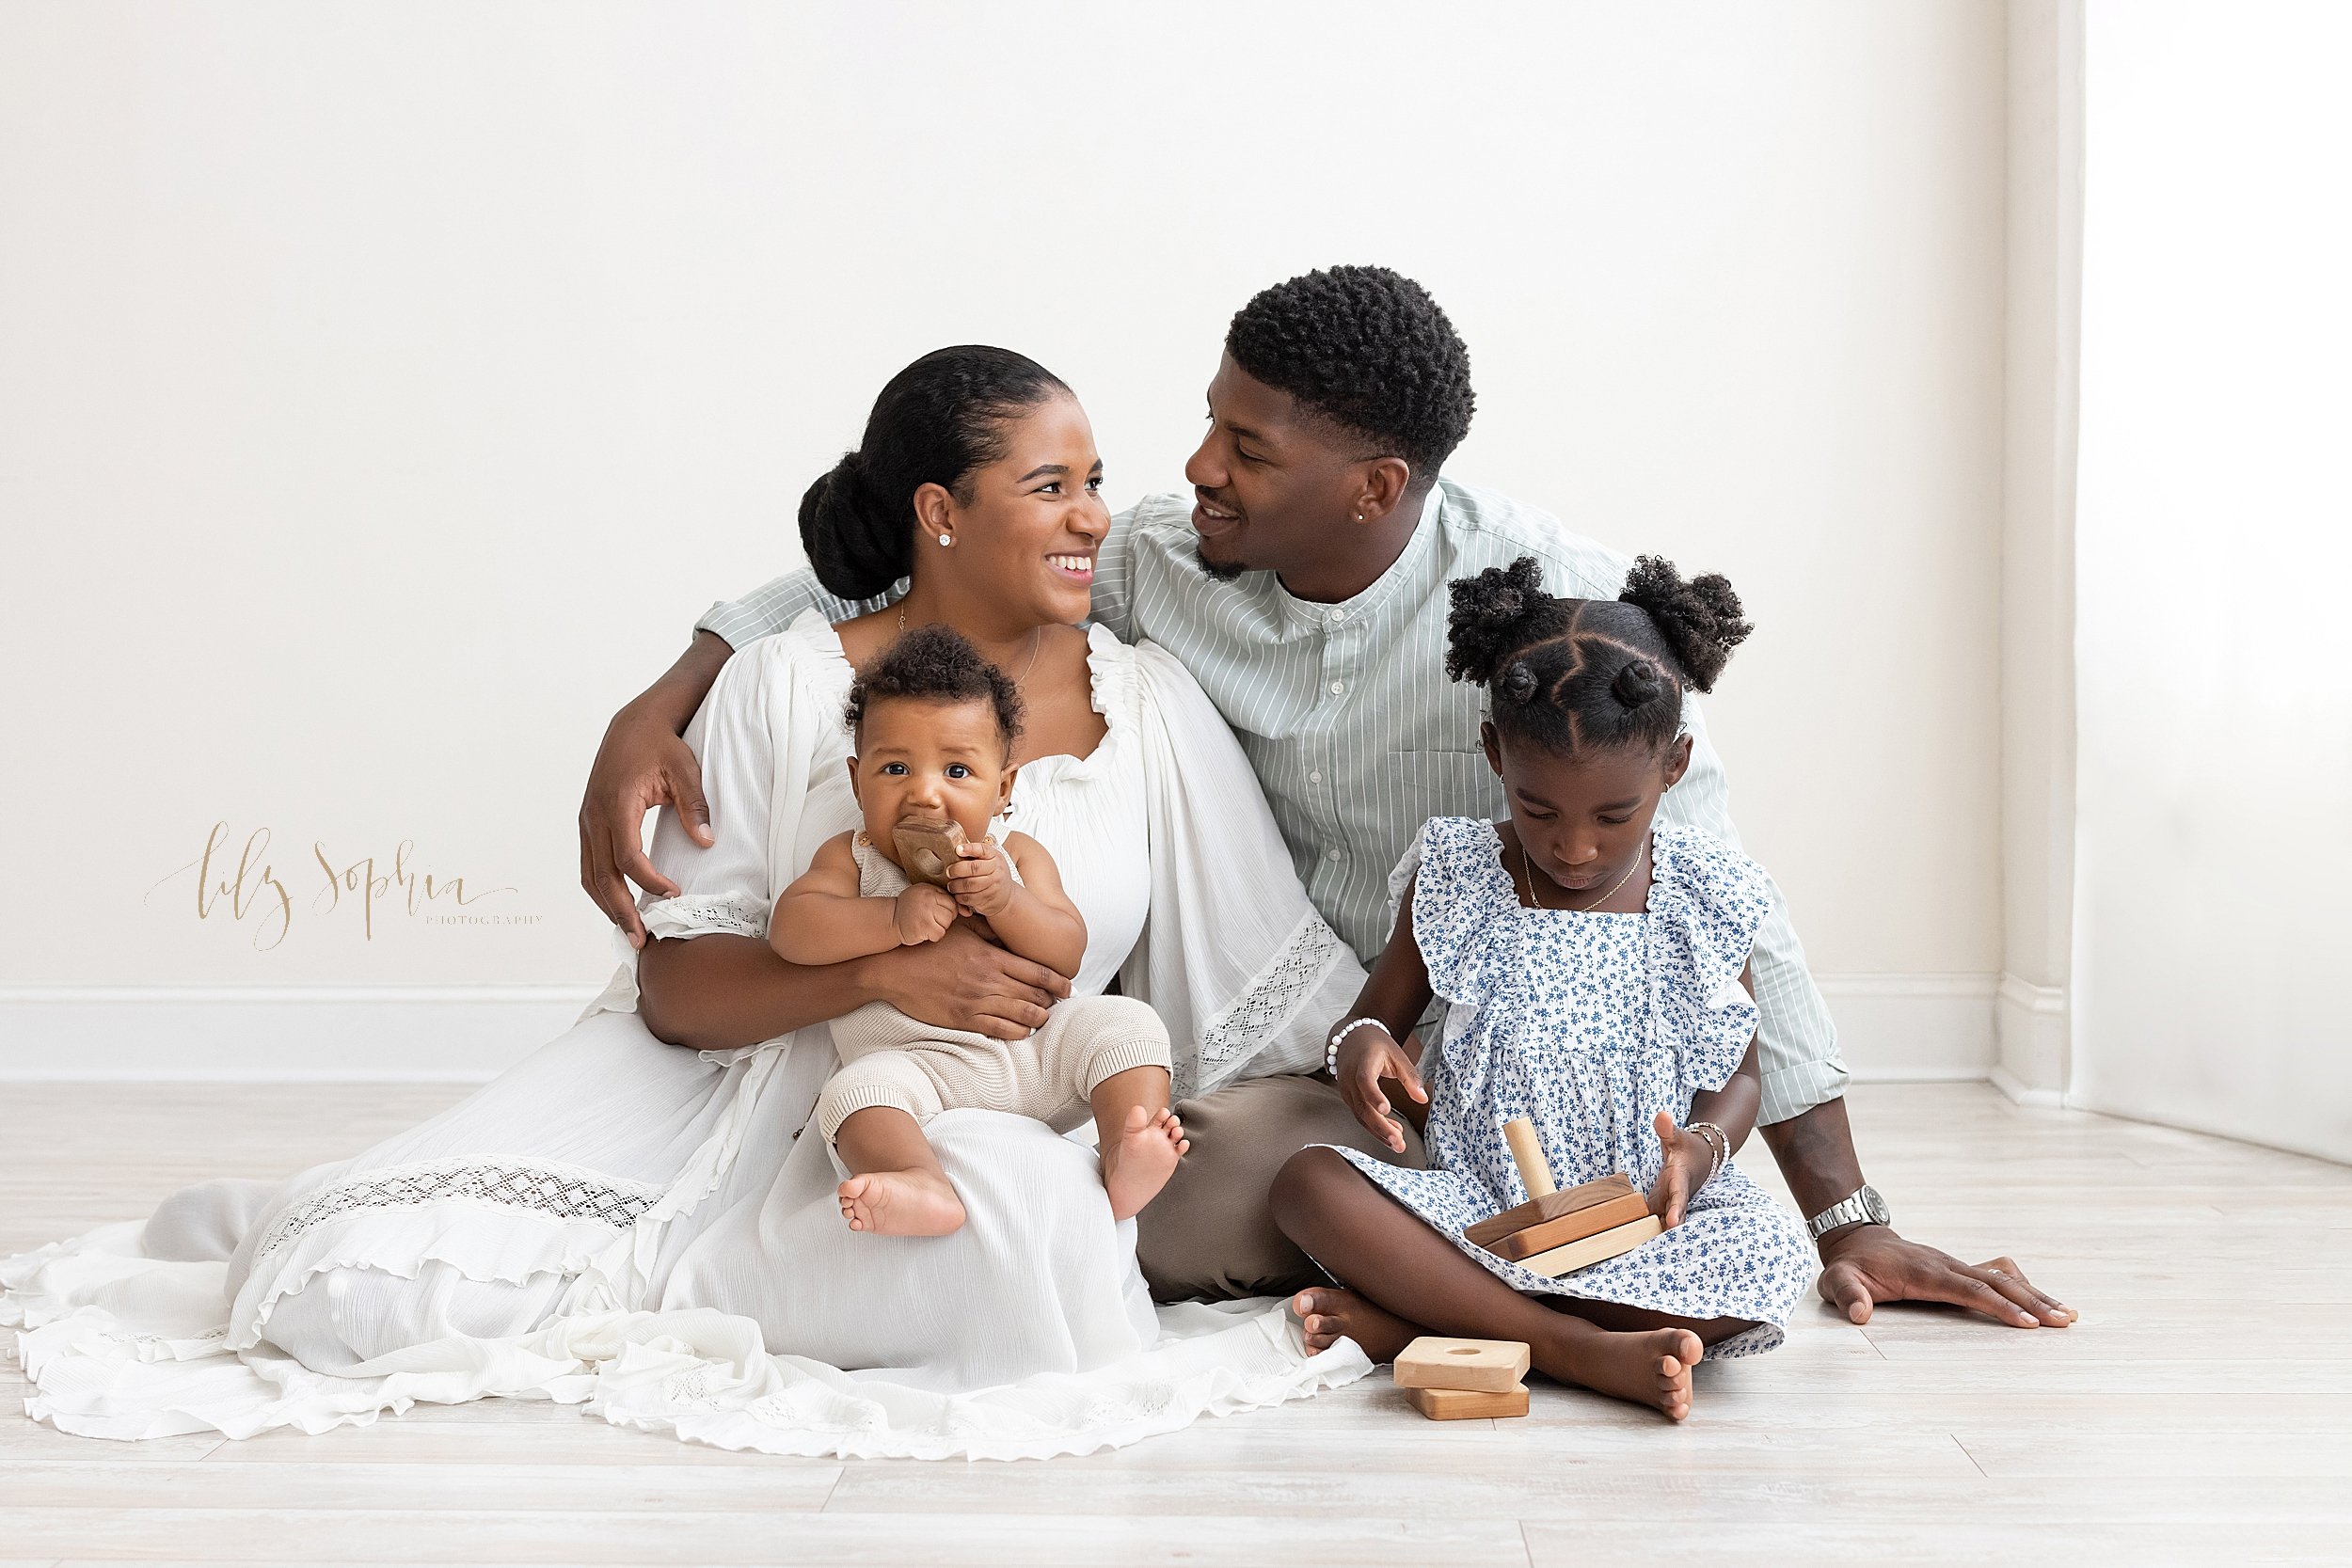  Family photos of an African-American family with the mom holding her baby son on her lap as he chews on a wooden toy, her husband sits next to her with his arm around her shoulder, and her young daughter sits in front of her father playing with a wo